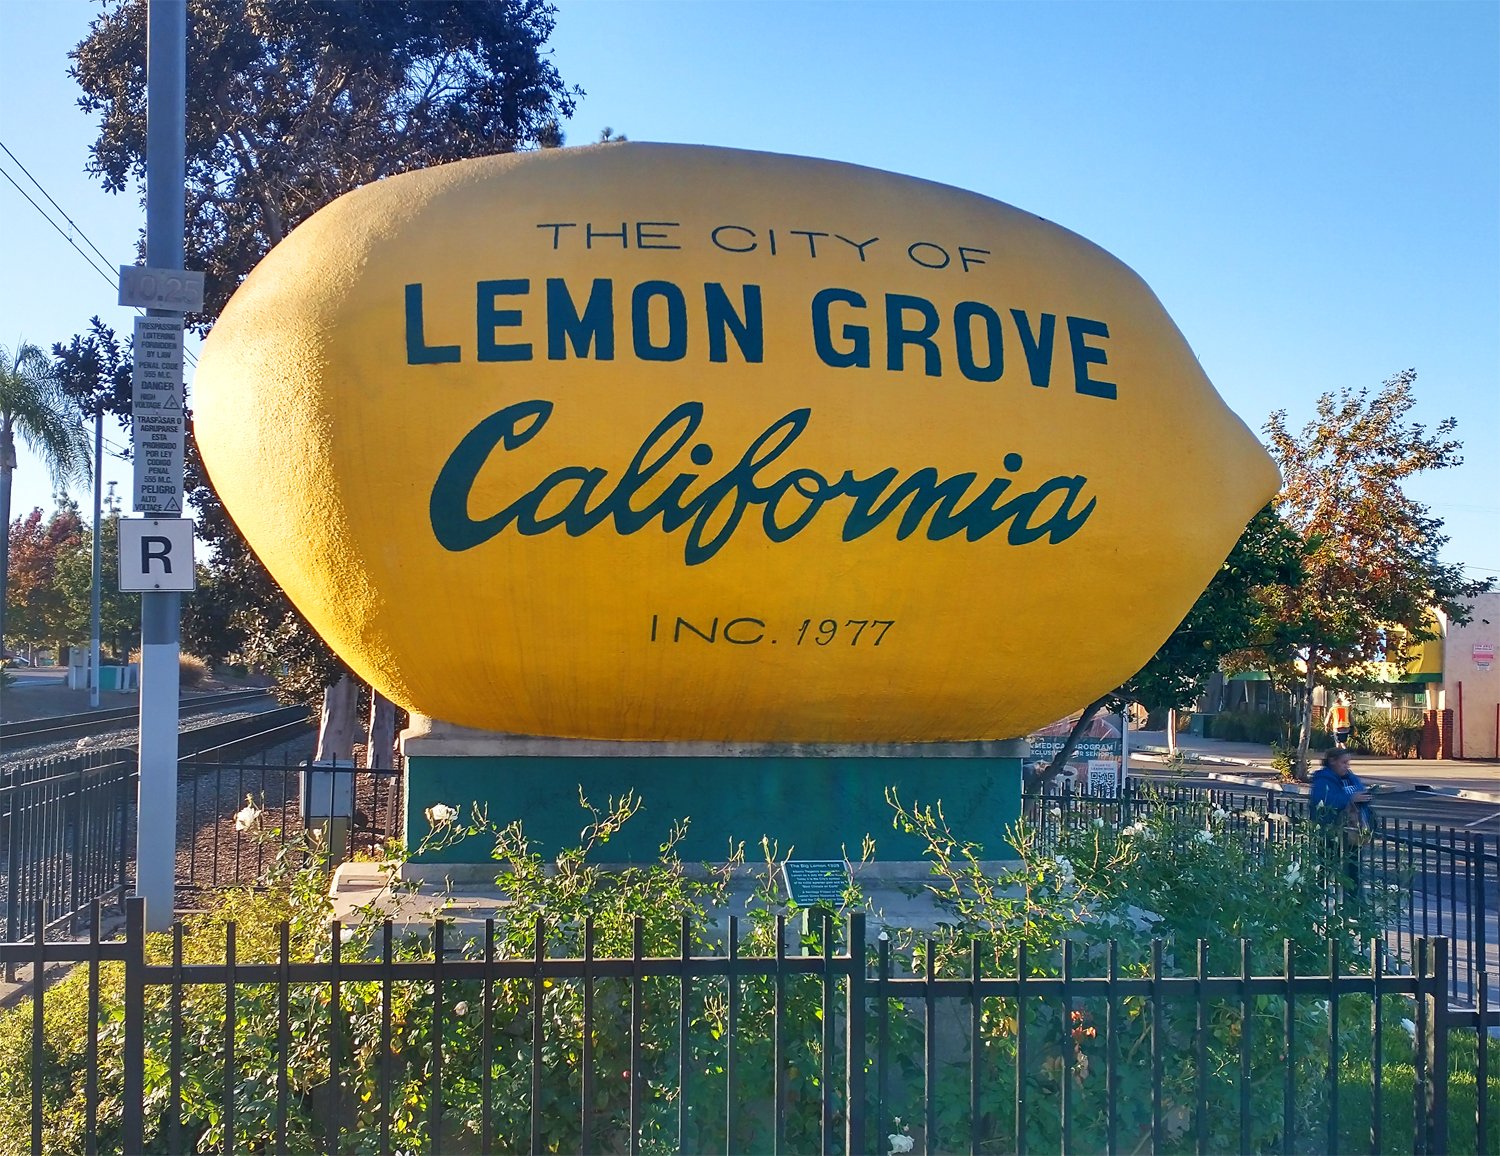 Arriving in San Diego: The largest lemon! I think.